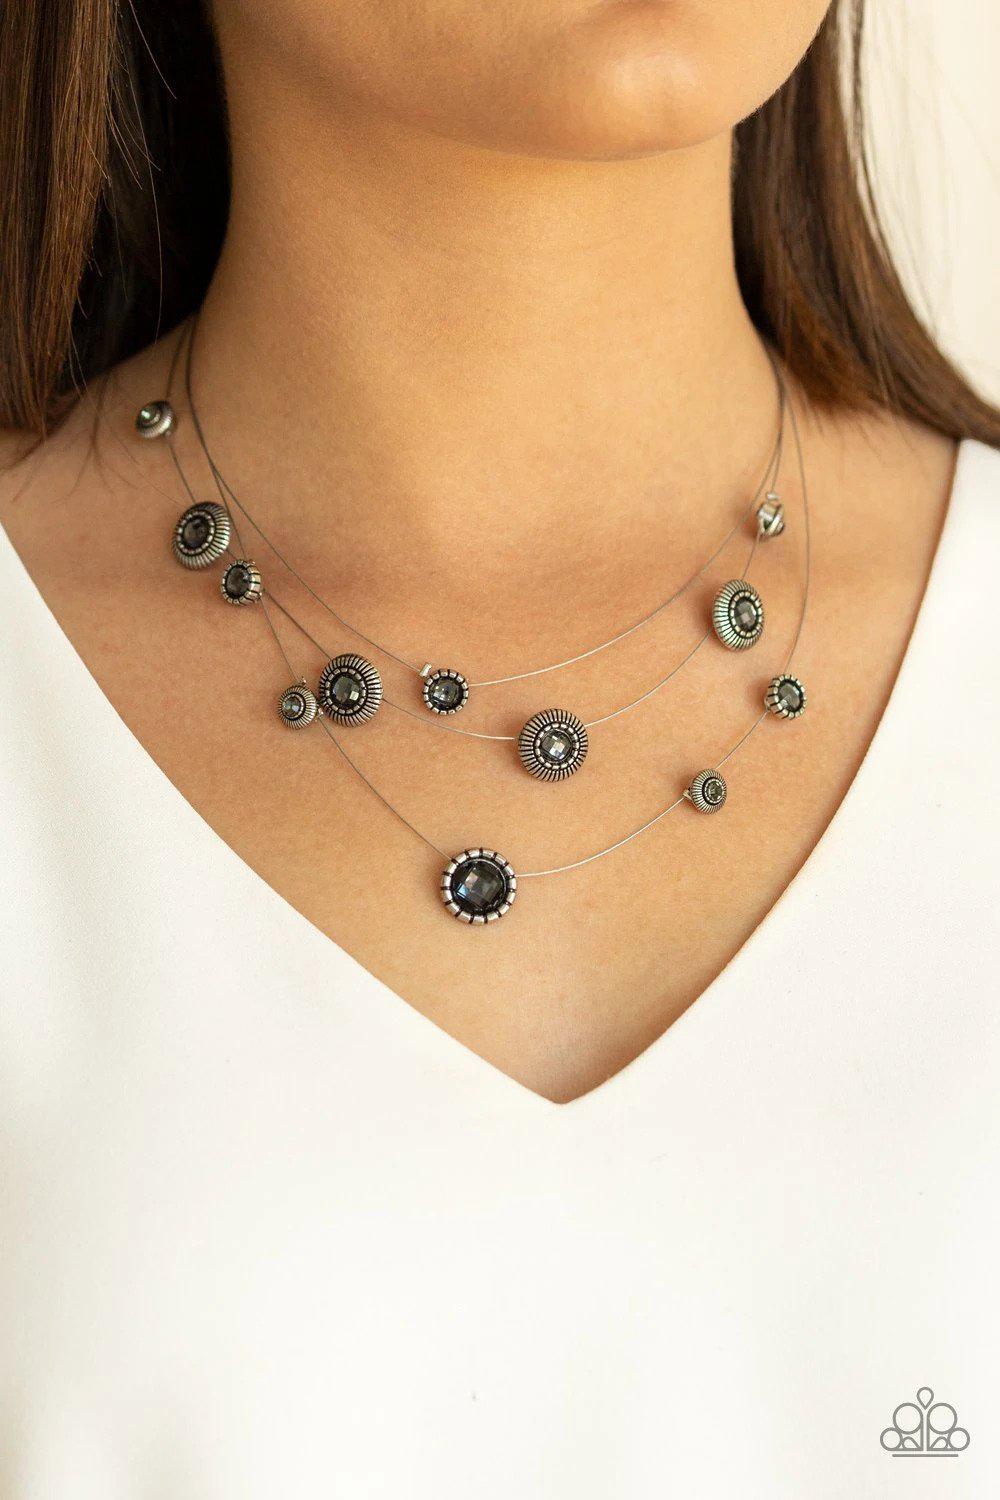 SHEER Thing! Silver Rhinestone Necklace - Paparazzi Accessories - lightbox -CarasShop.com - $5 Jewelry by Cara Jewels